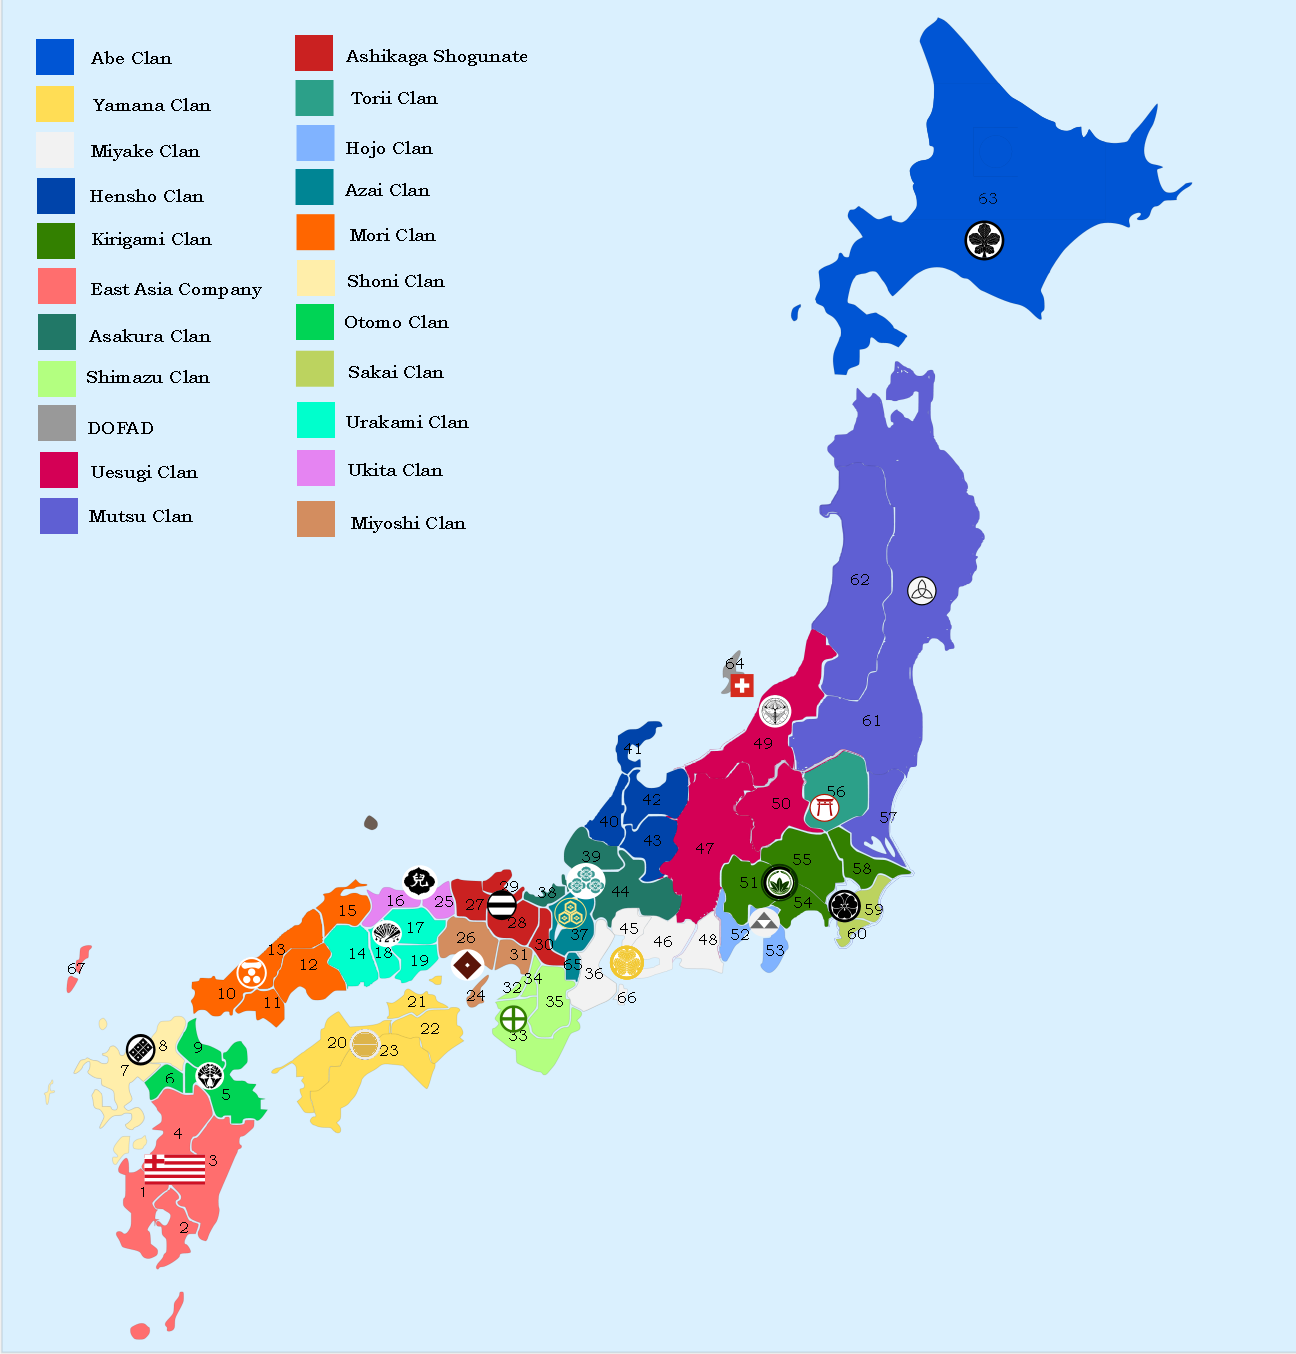 Ancient Map Of Japan - Free Printable Maps